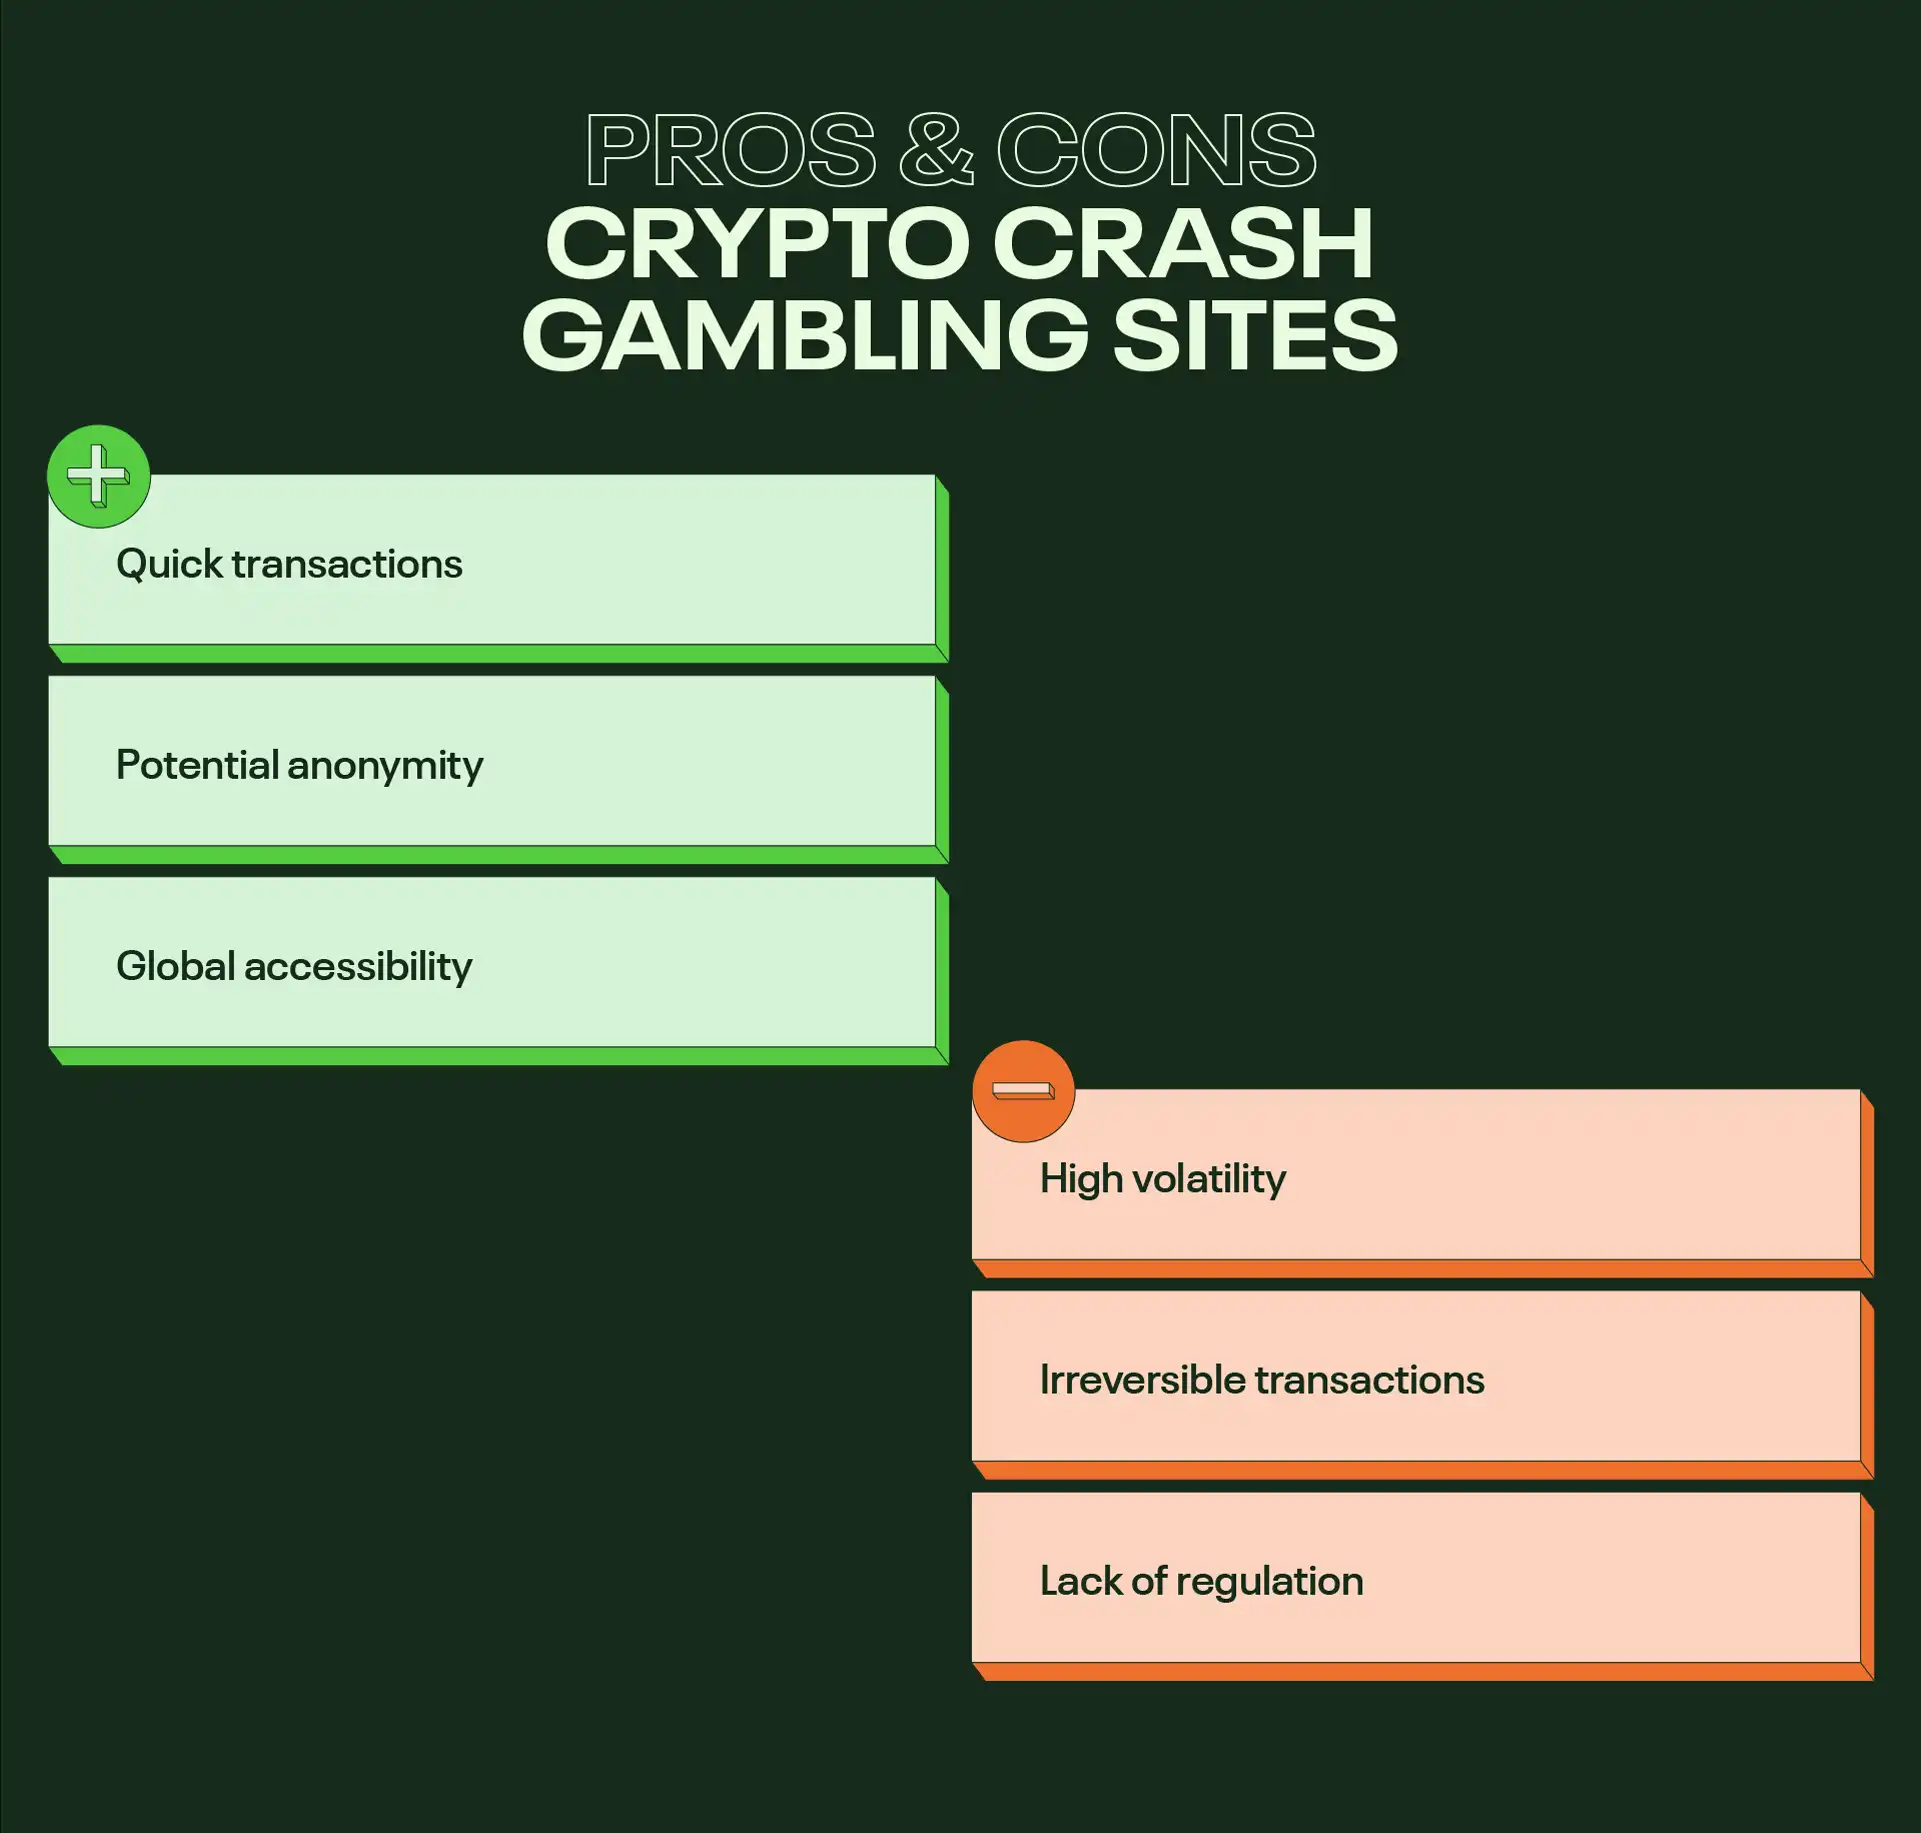 Pros and cons of crypto crash gambling sites